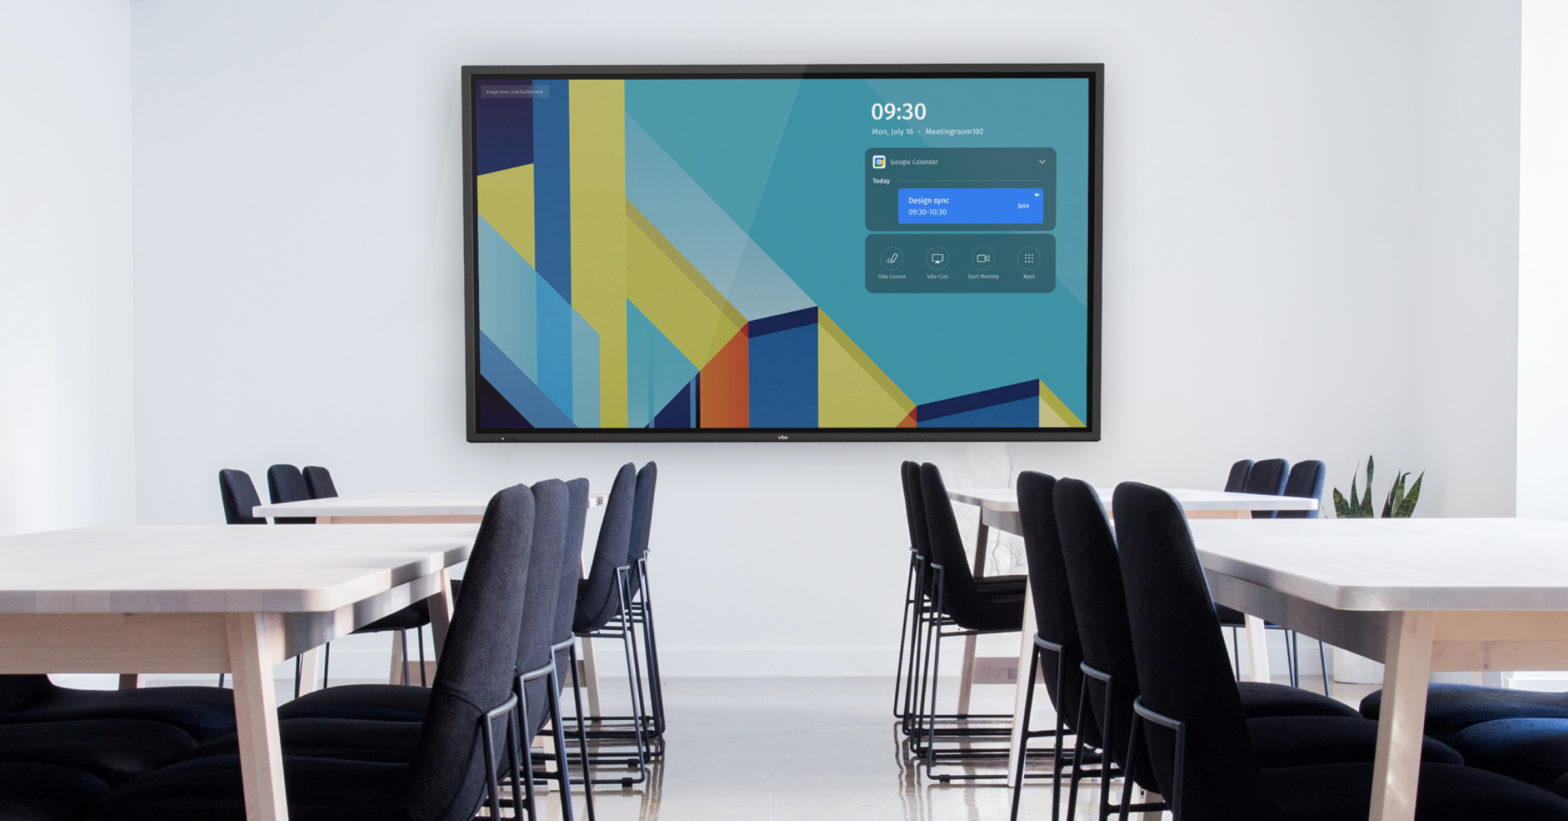 Vibe Smartboards in higher education